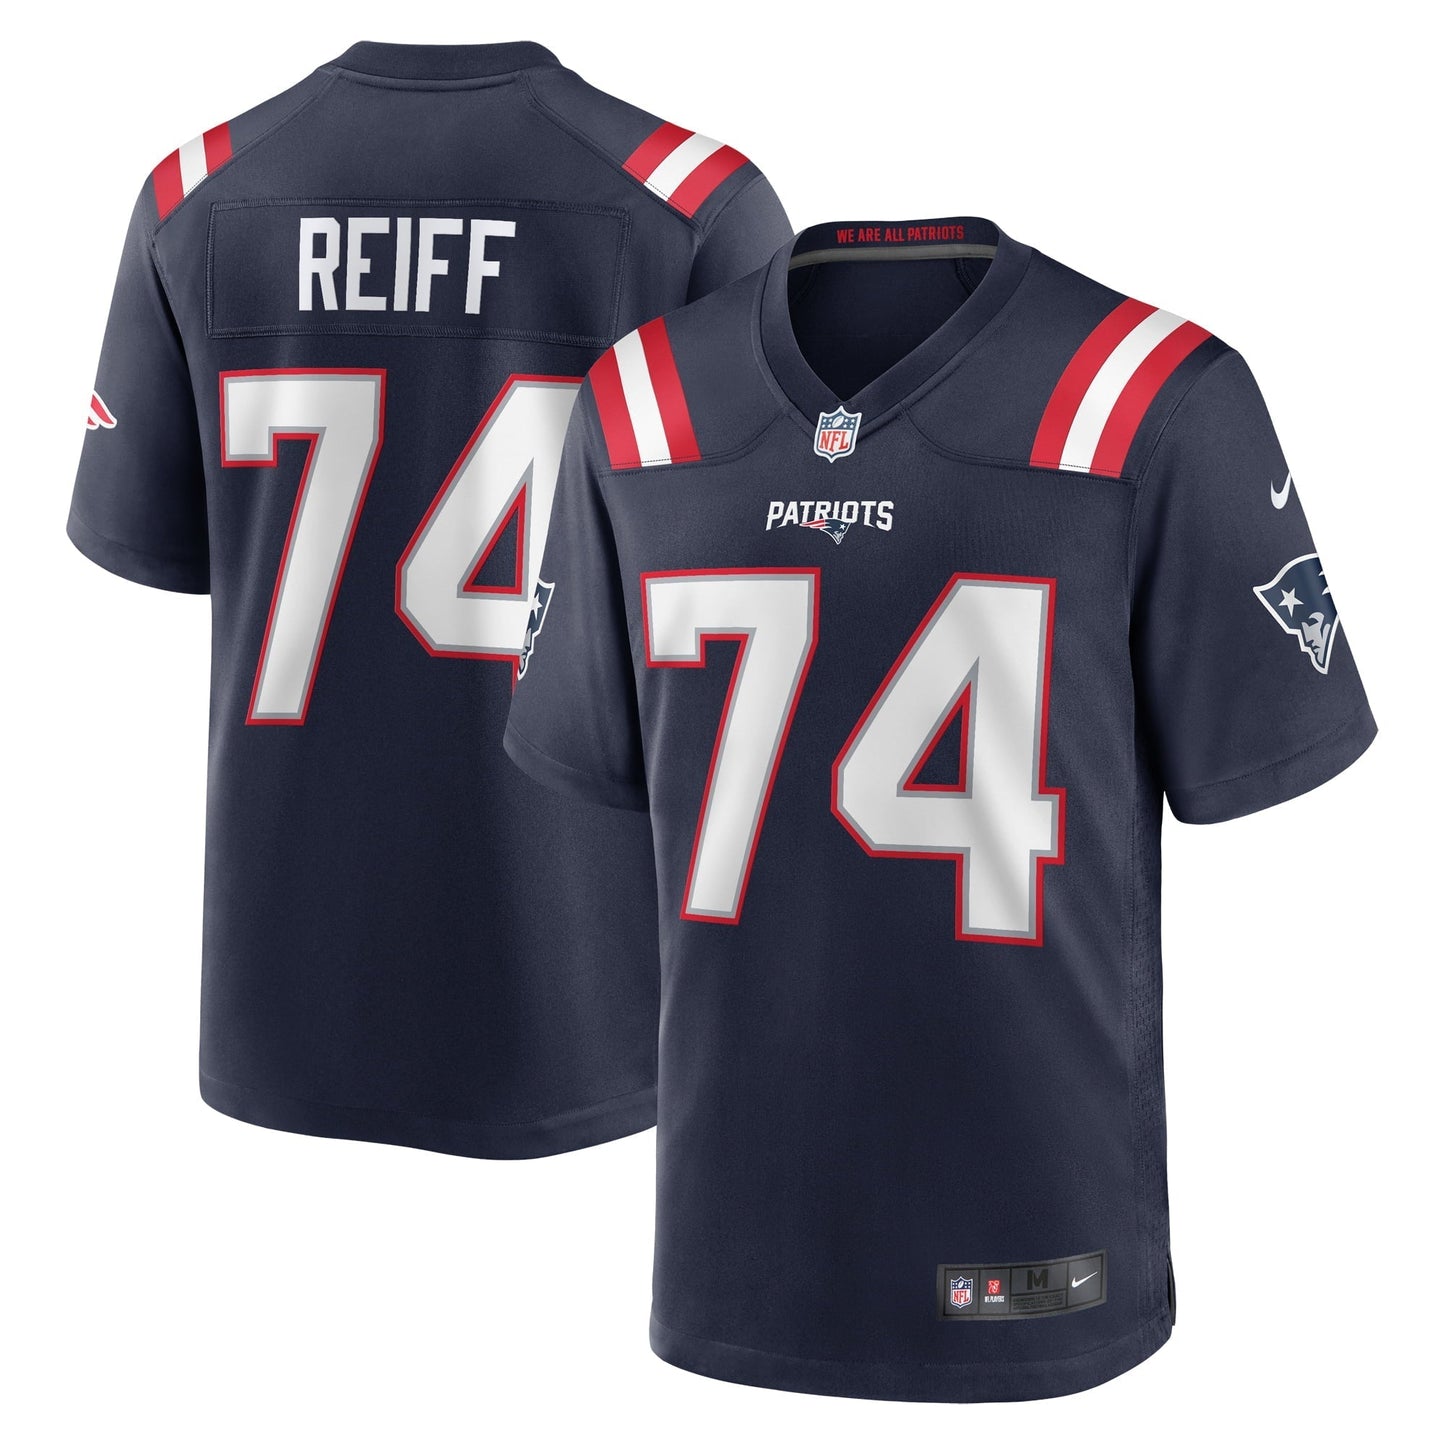 Men's Nike Riley Reiff Navy New England Patriots Game Jersey